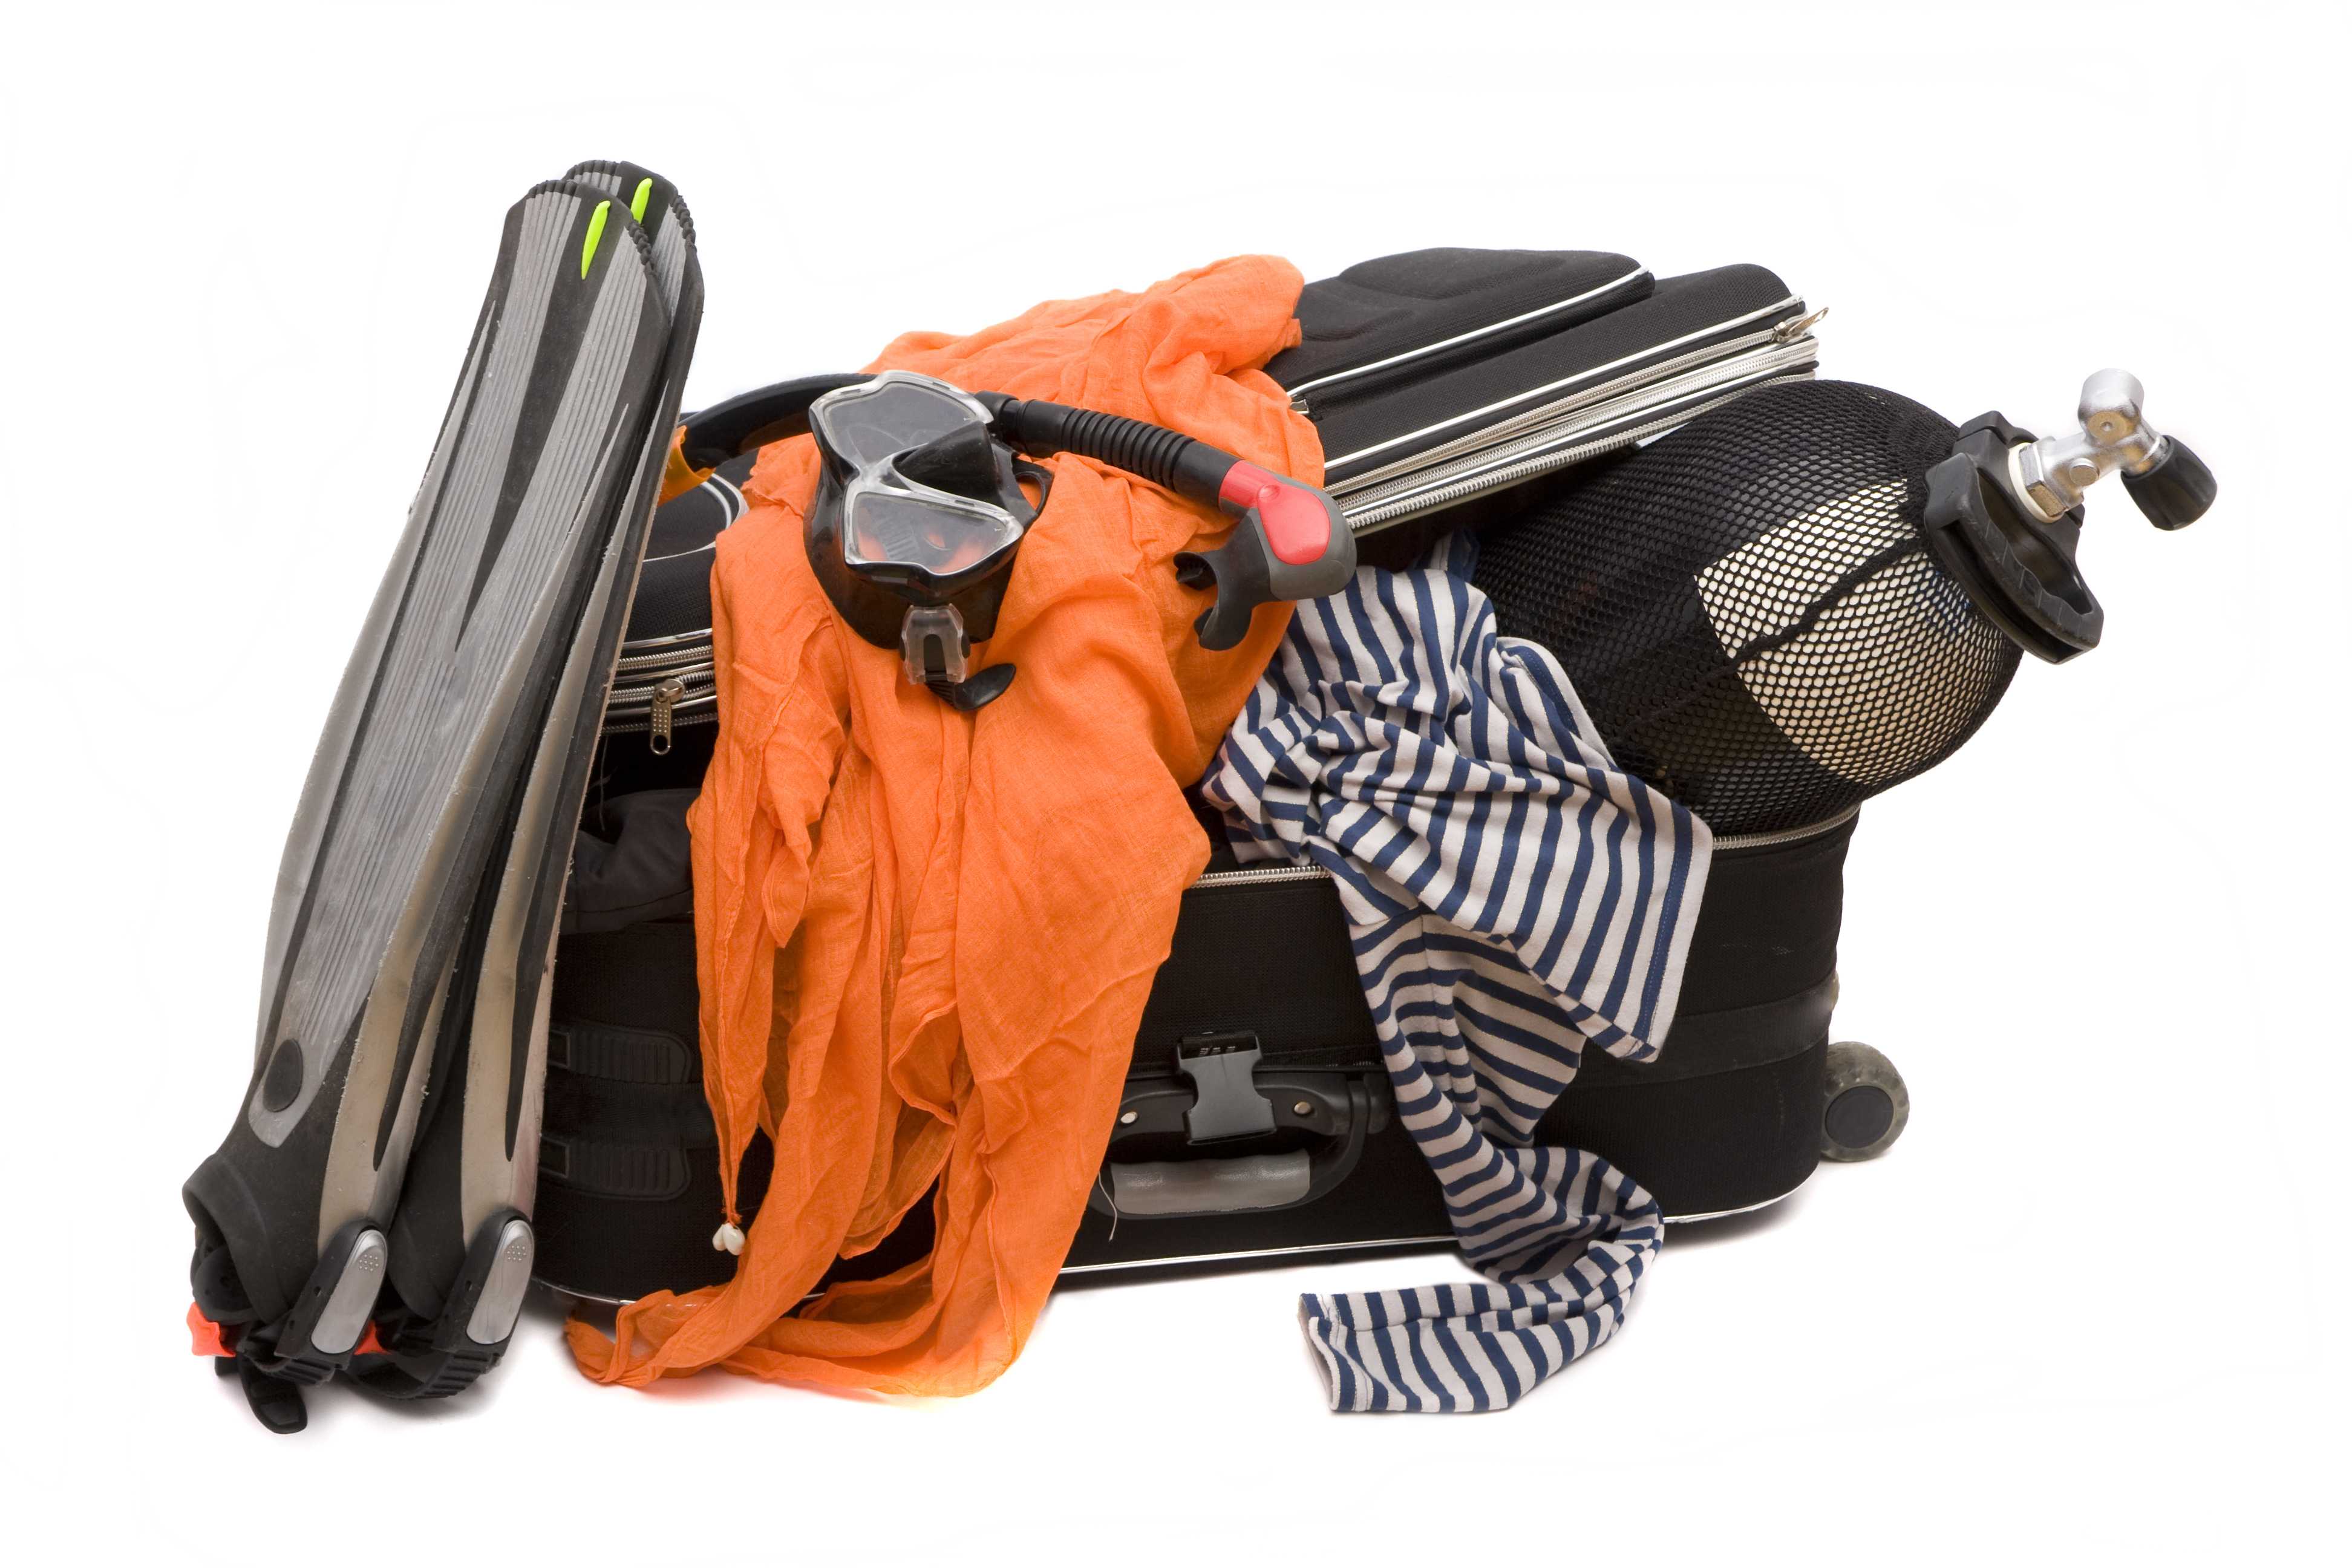 A scuba gear bag with several pieces of dive equipment ready to be packed safely